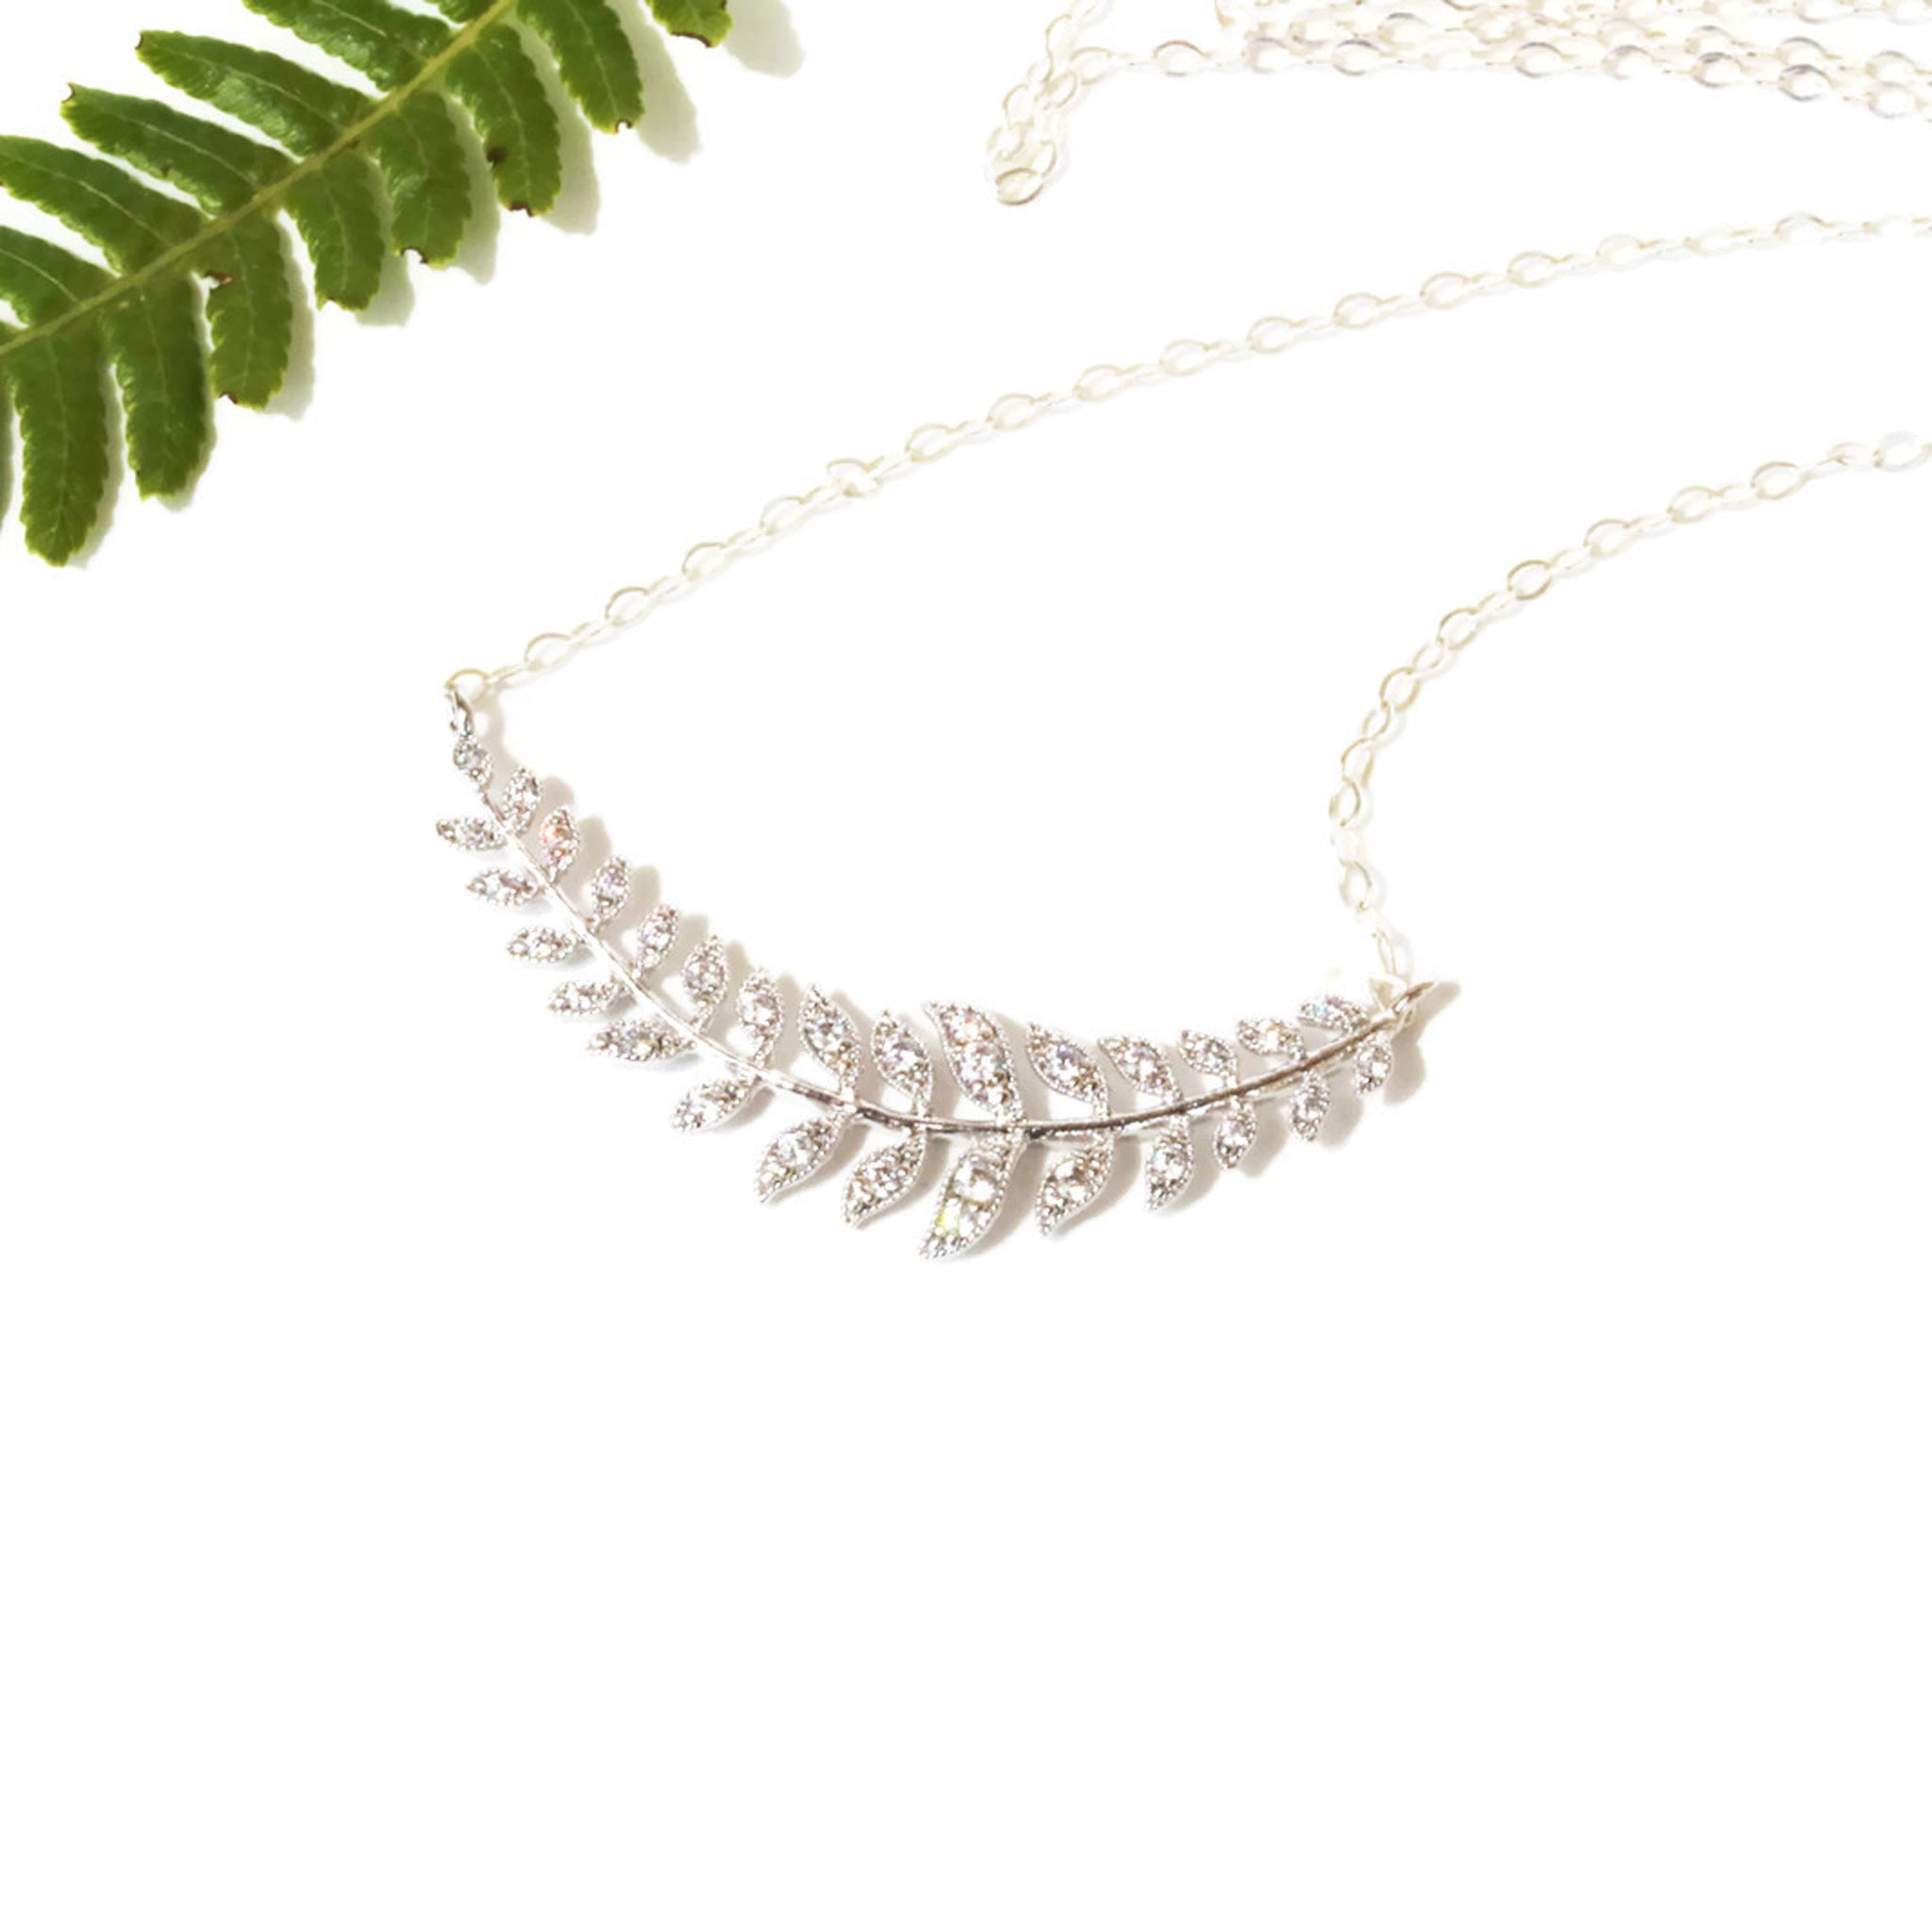 Silver Laurel Leaf Necklace Minimalist Bridal Jewelry - Sienna Grace Jewelry | Pretty Little Handcrafted Sparkles